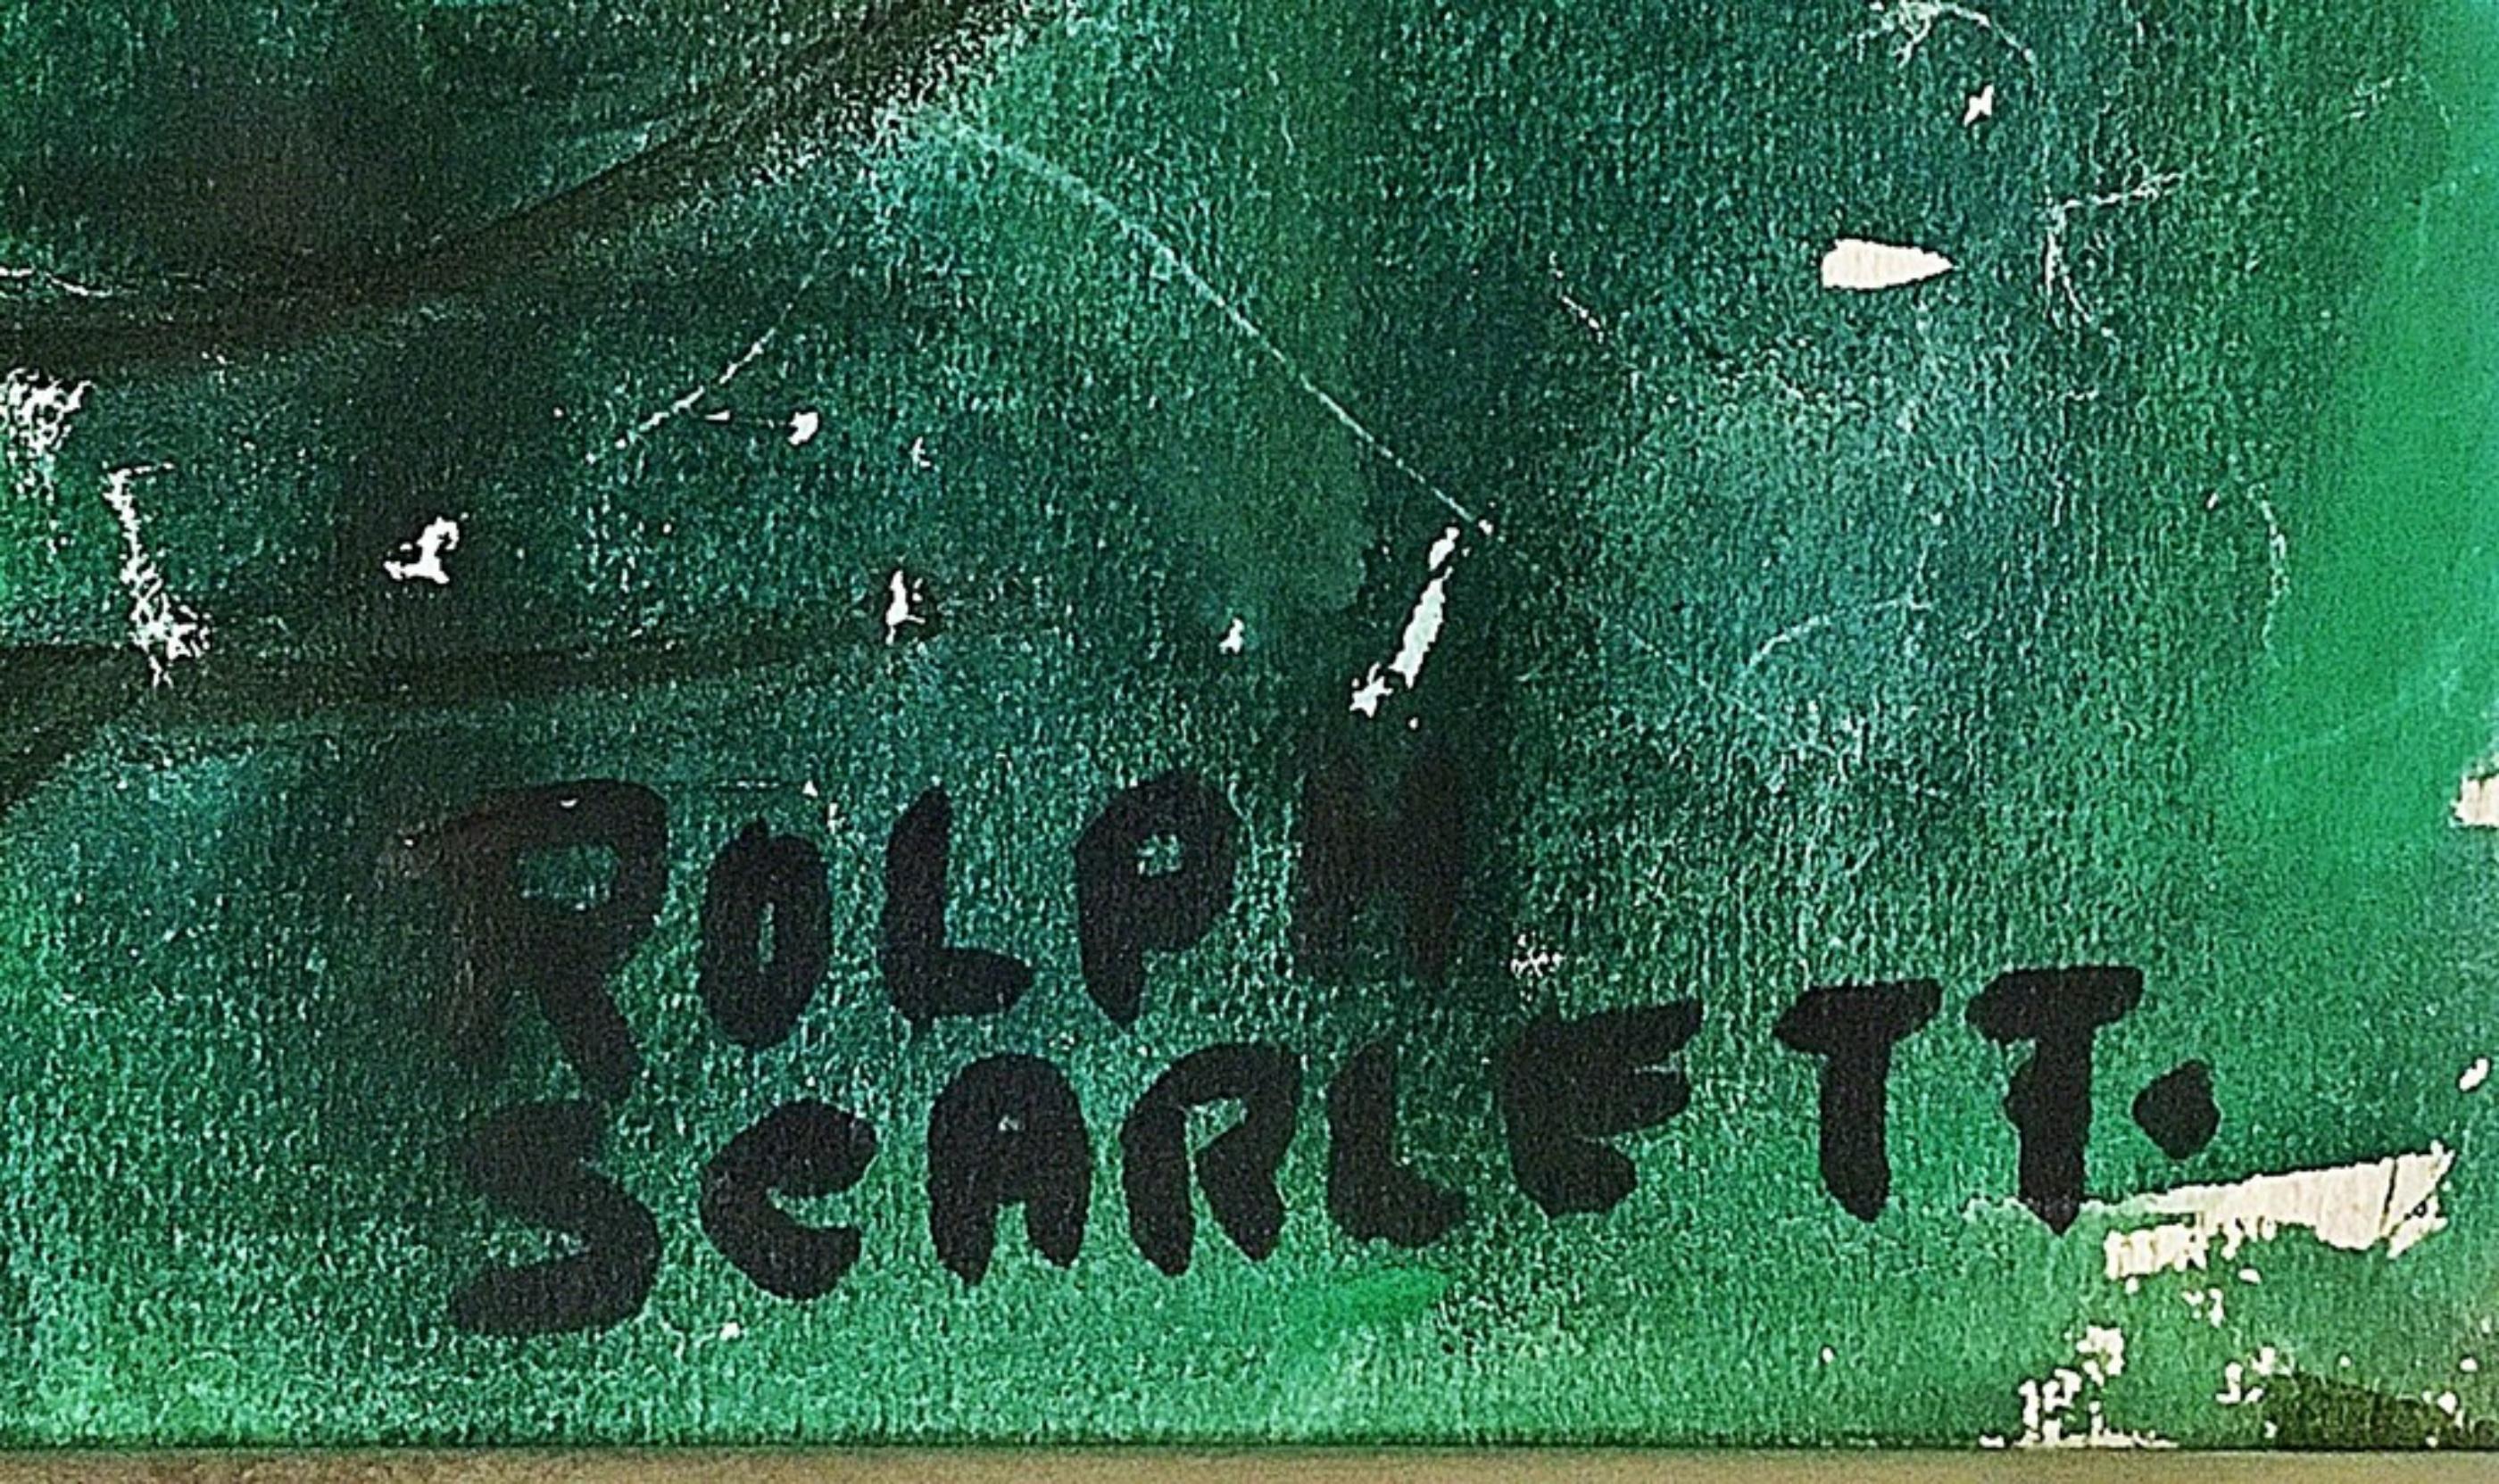 Rolph Scarlett
Untitled Abstract Expressionist Painting, ca. 1960
Gouache, Ink, Watercolor on Paper . Hand signed, with original Jonas Aarons Gallery label
23 × 18 3/4 inches
Signed lower right
Unframed but has the original board with Jonas Aarons